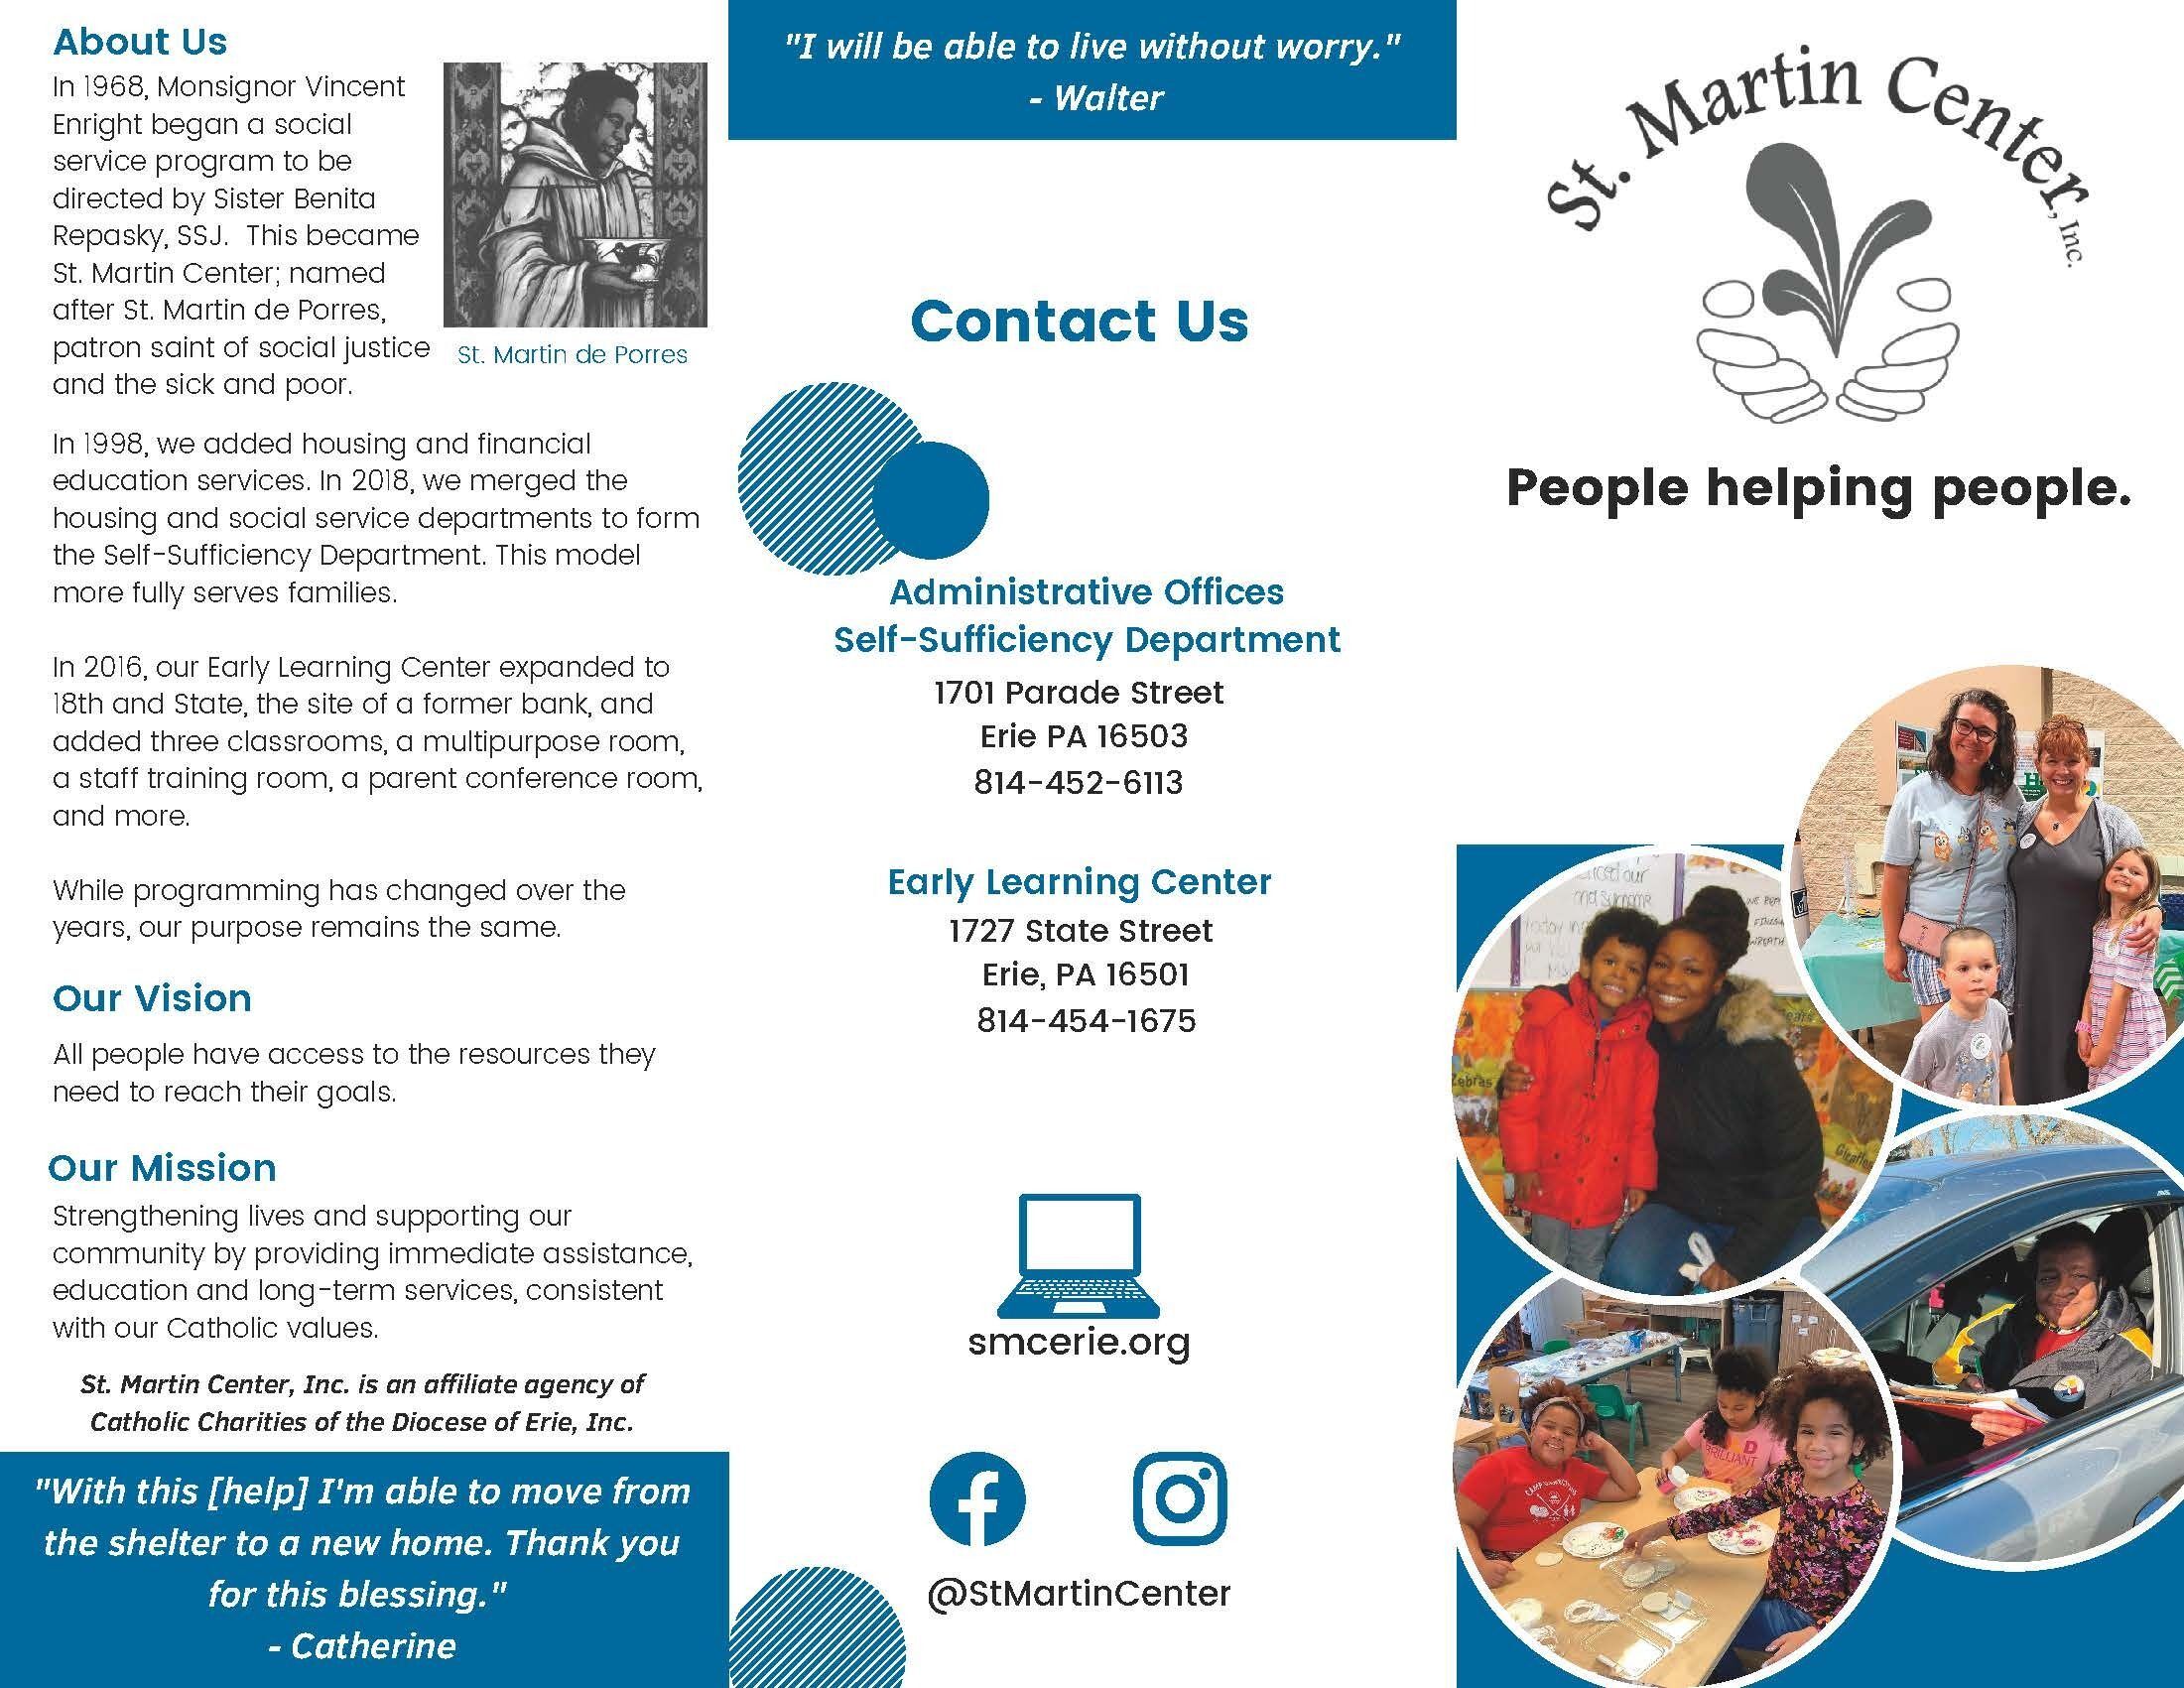 A brochure containing information about St. Martin Center, including contact information and their history, mission, and vision.